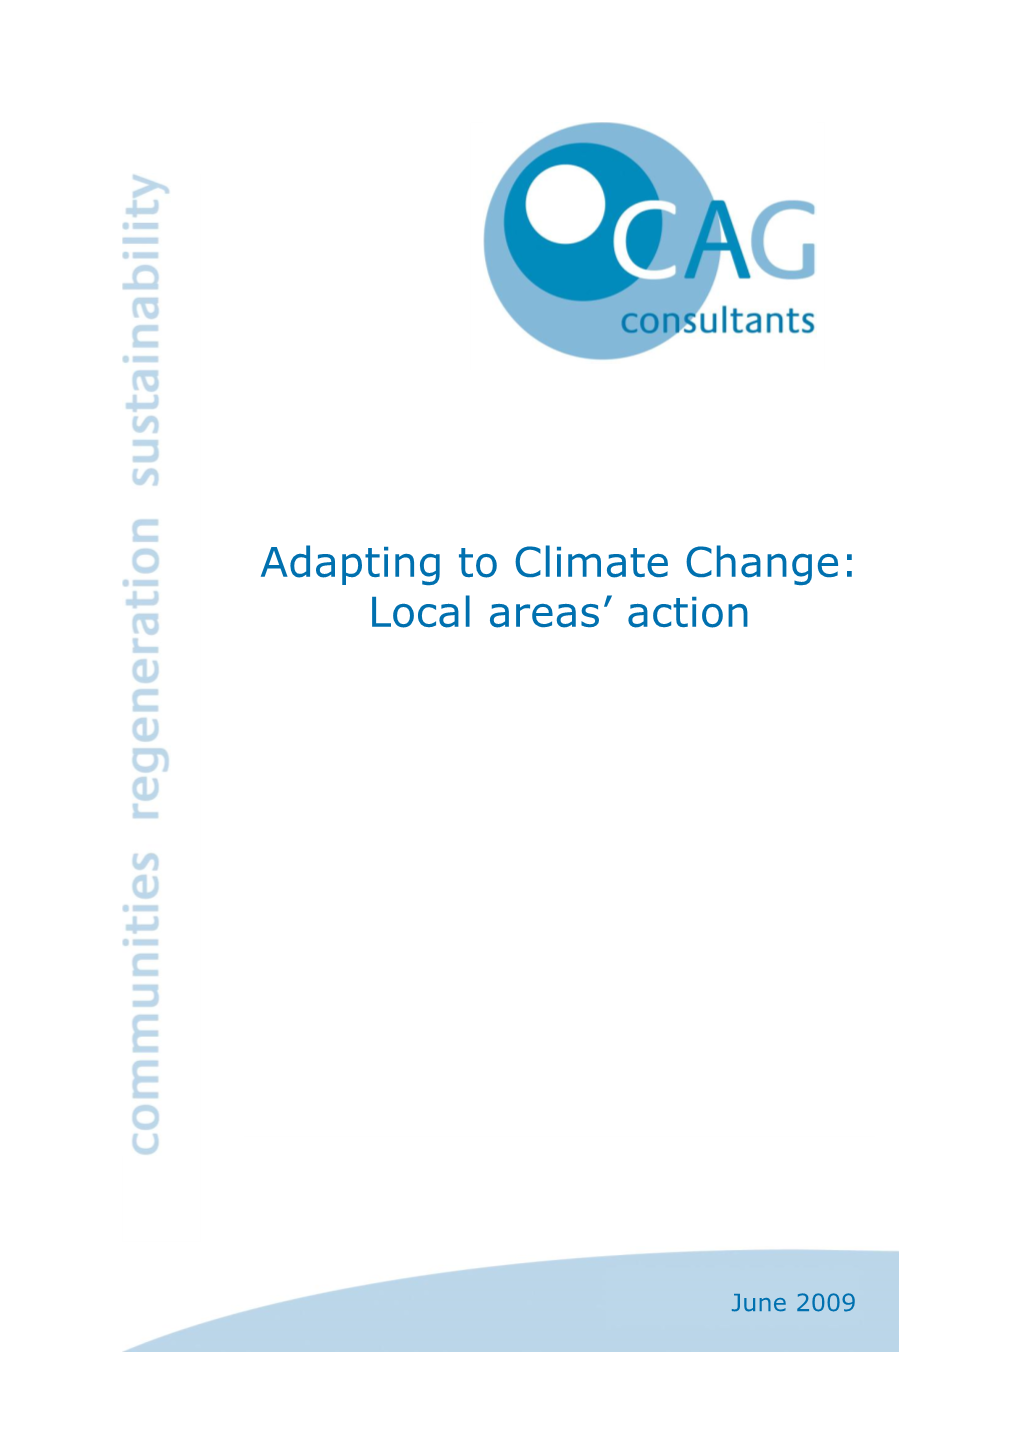 Adapting to Climate Change: Local Areas‟ Action